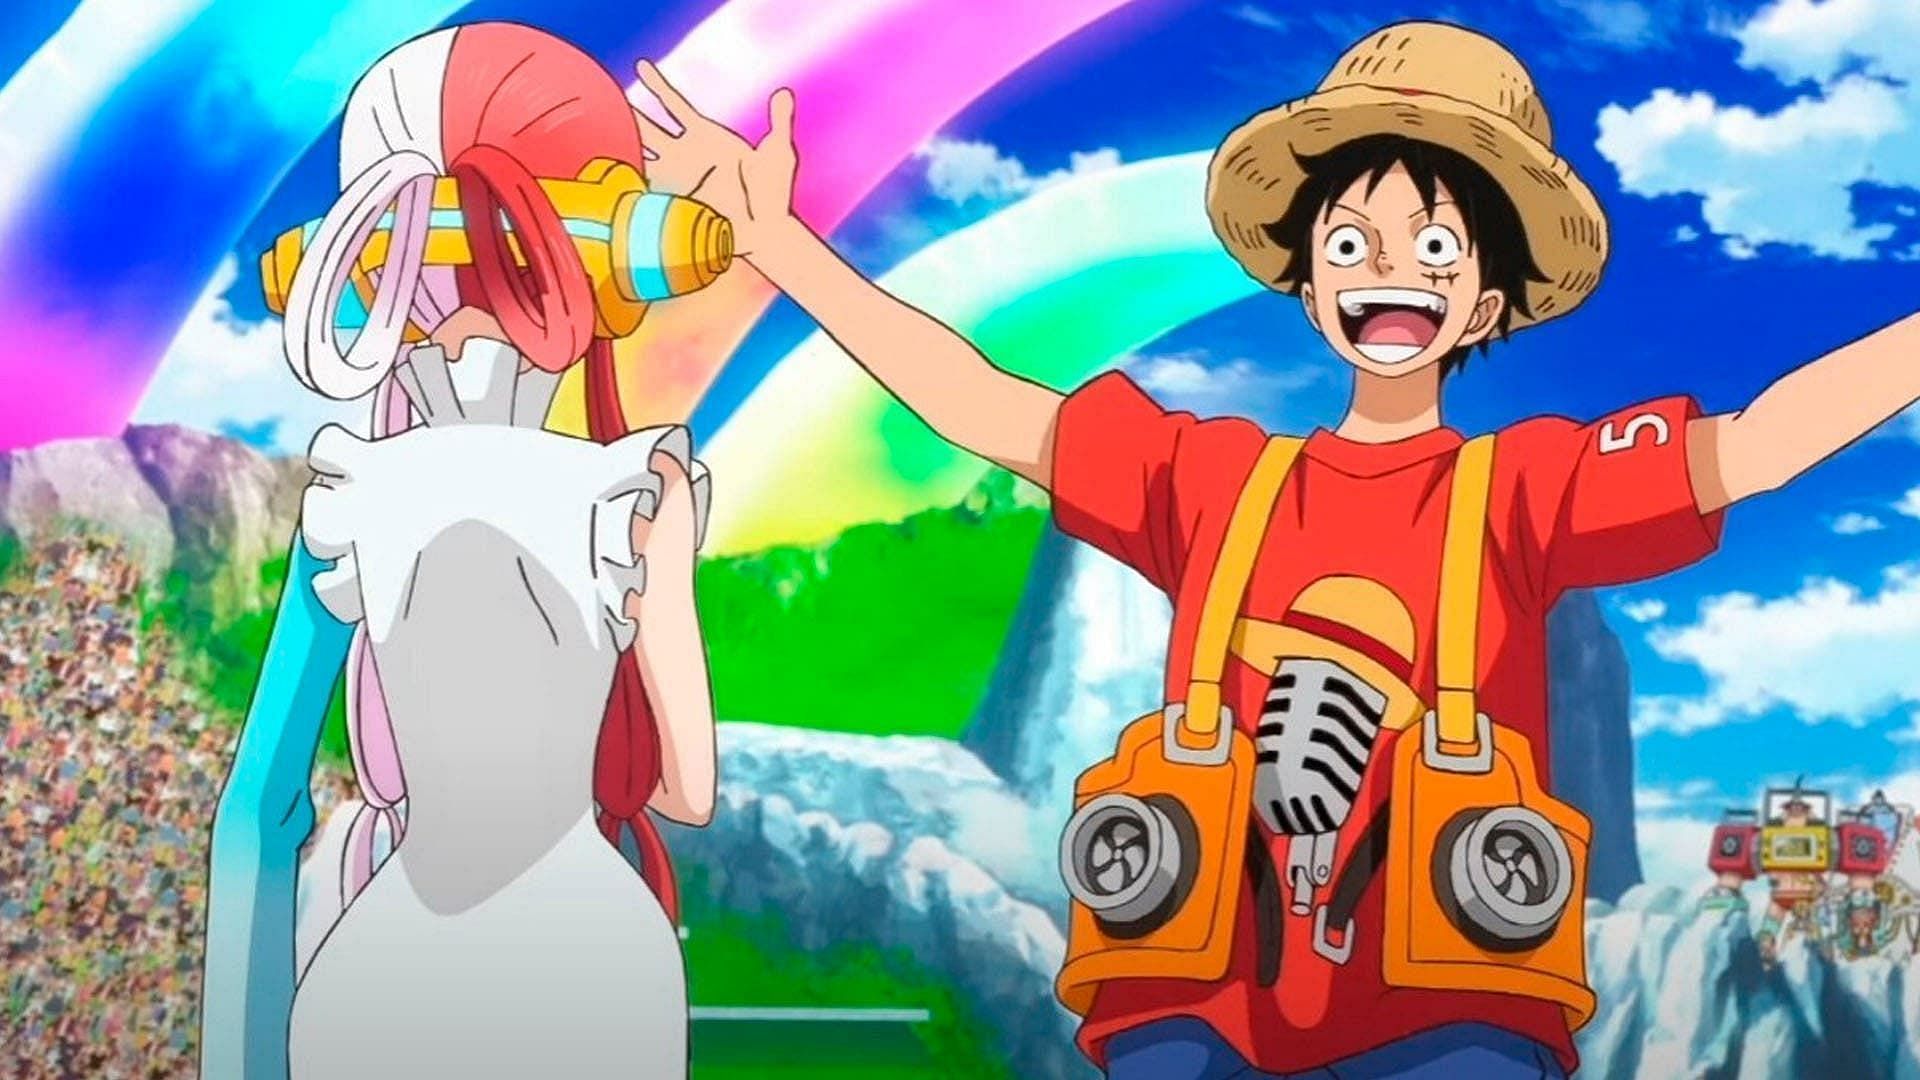 Crunchyroll Schedules 'One Piece FILM RED' Anime Feature Film Streaming